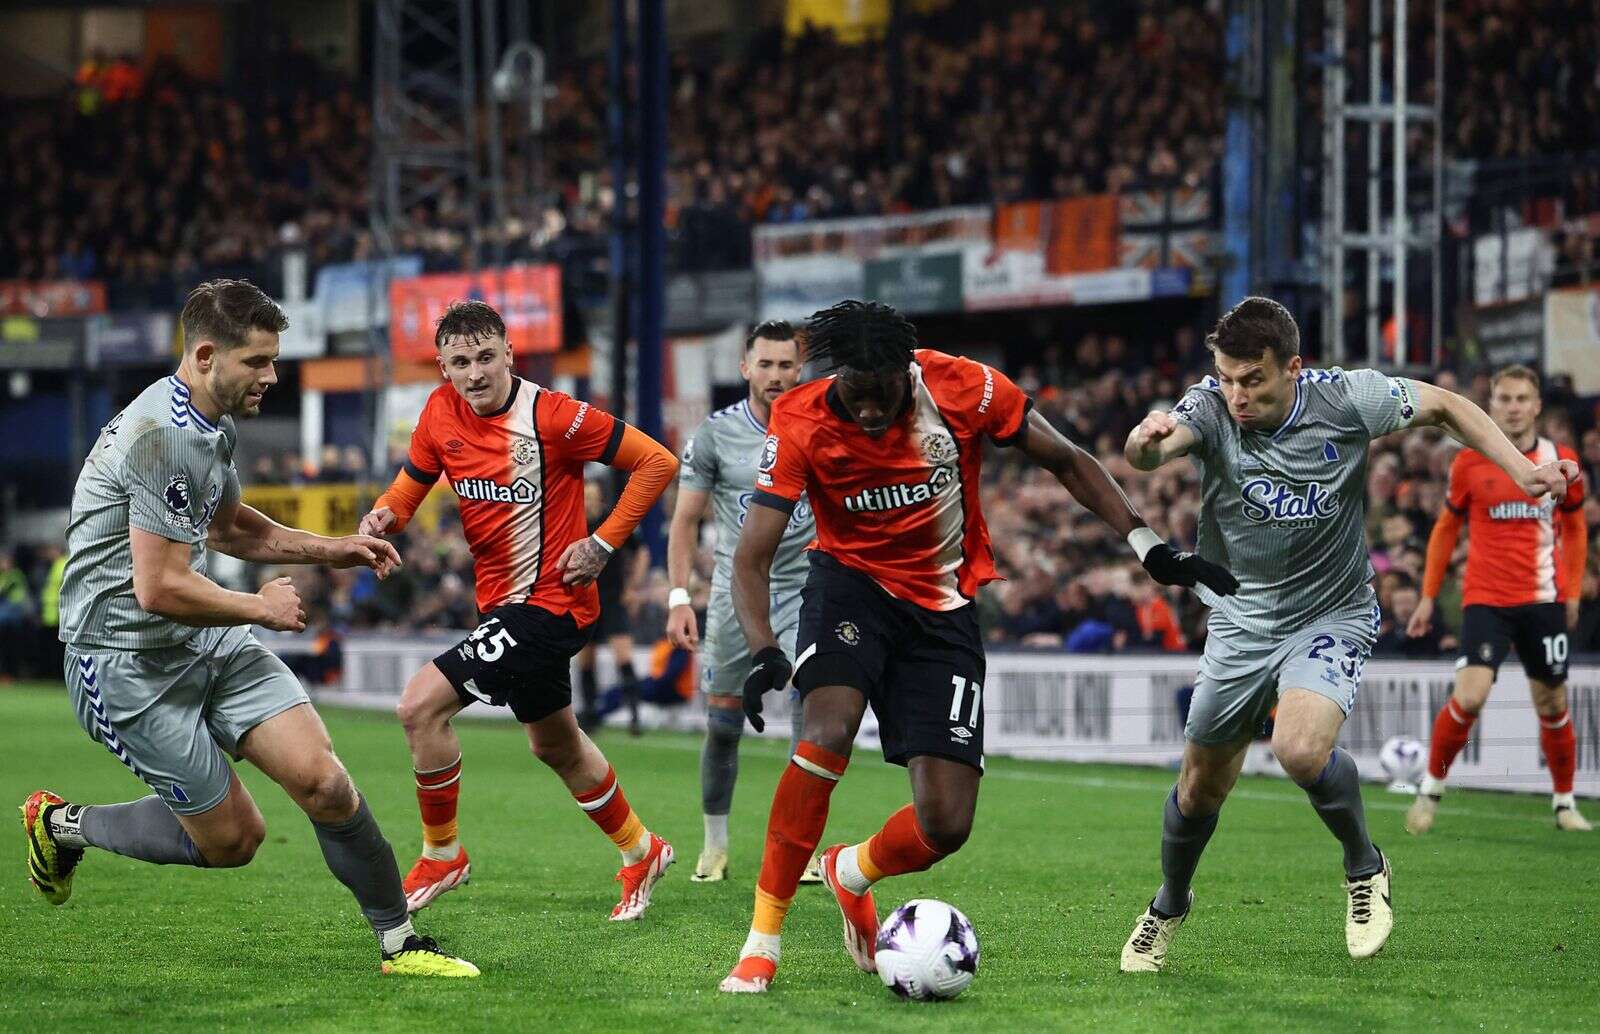 adebayo rescues struggling luton who miss out on 'huge' win against everton